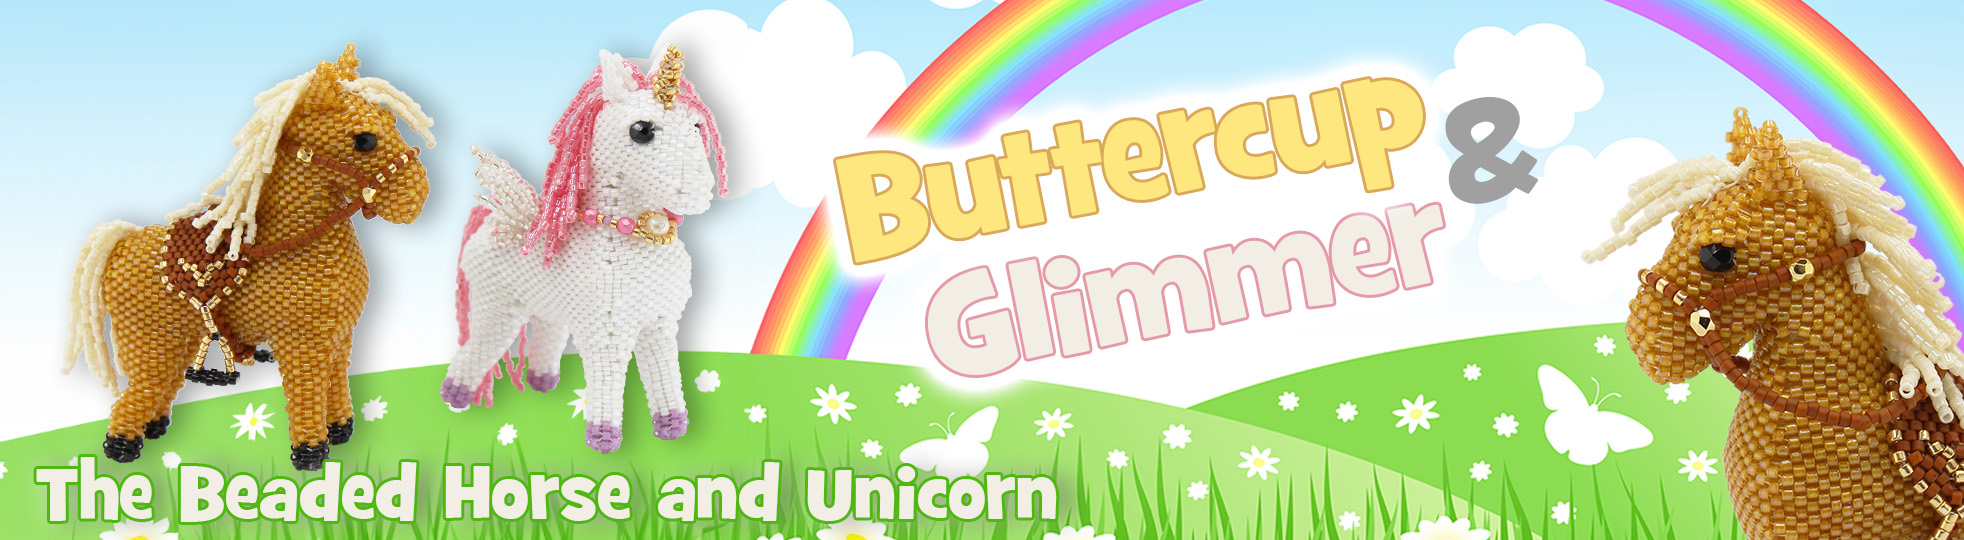 Glimmer the Unicorn Component Pack